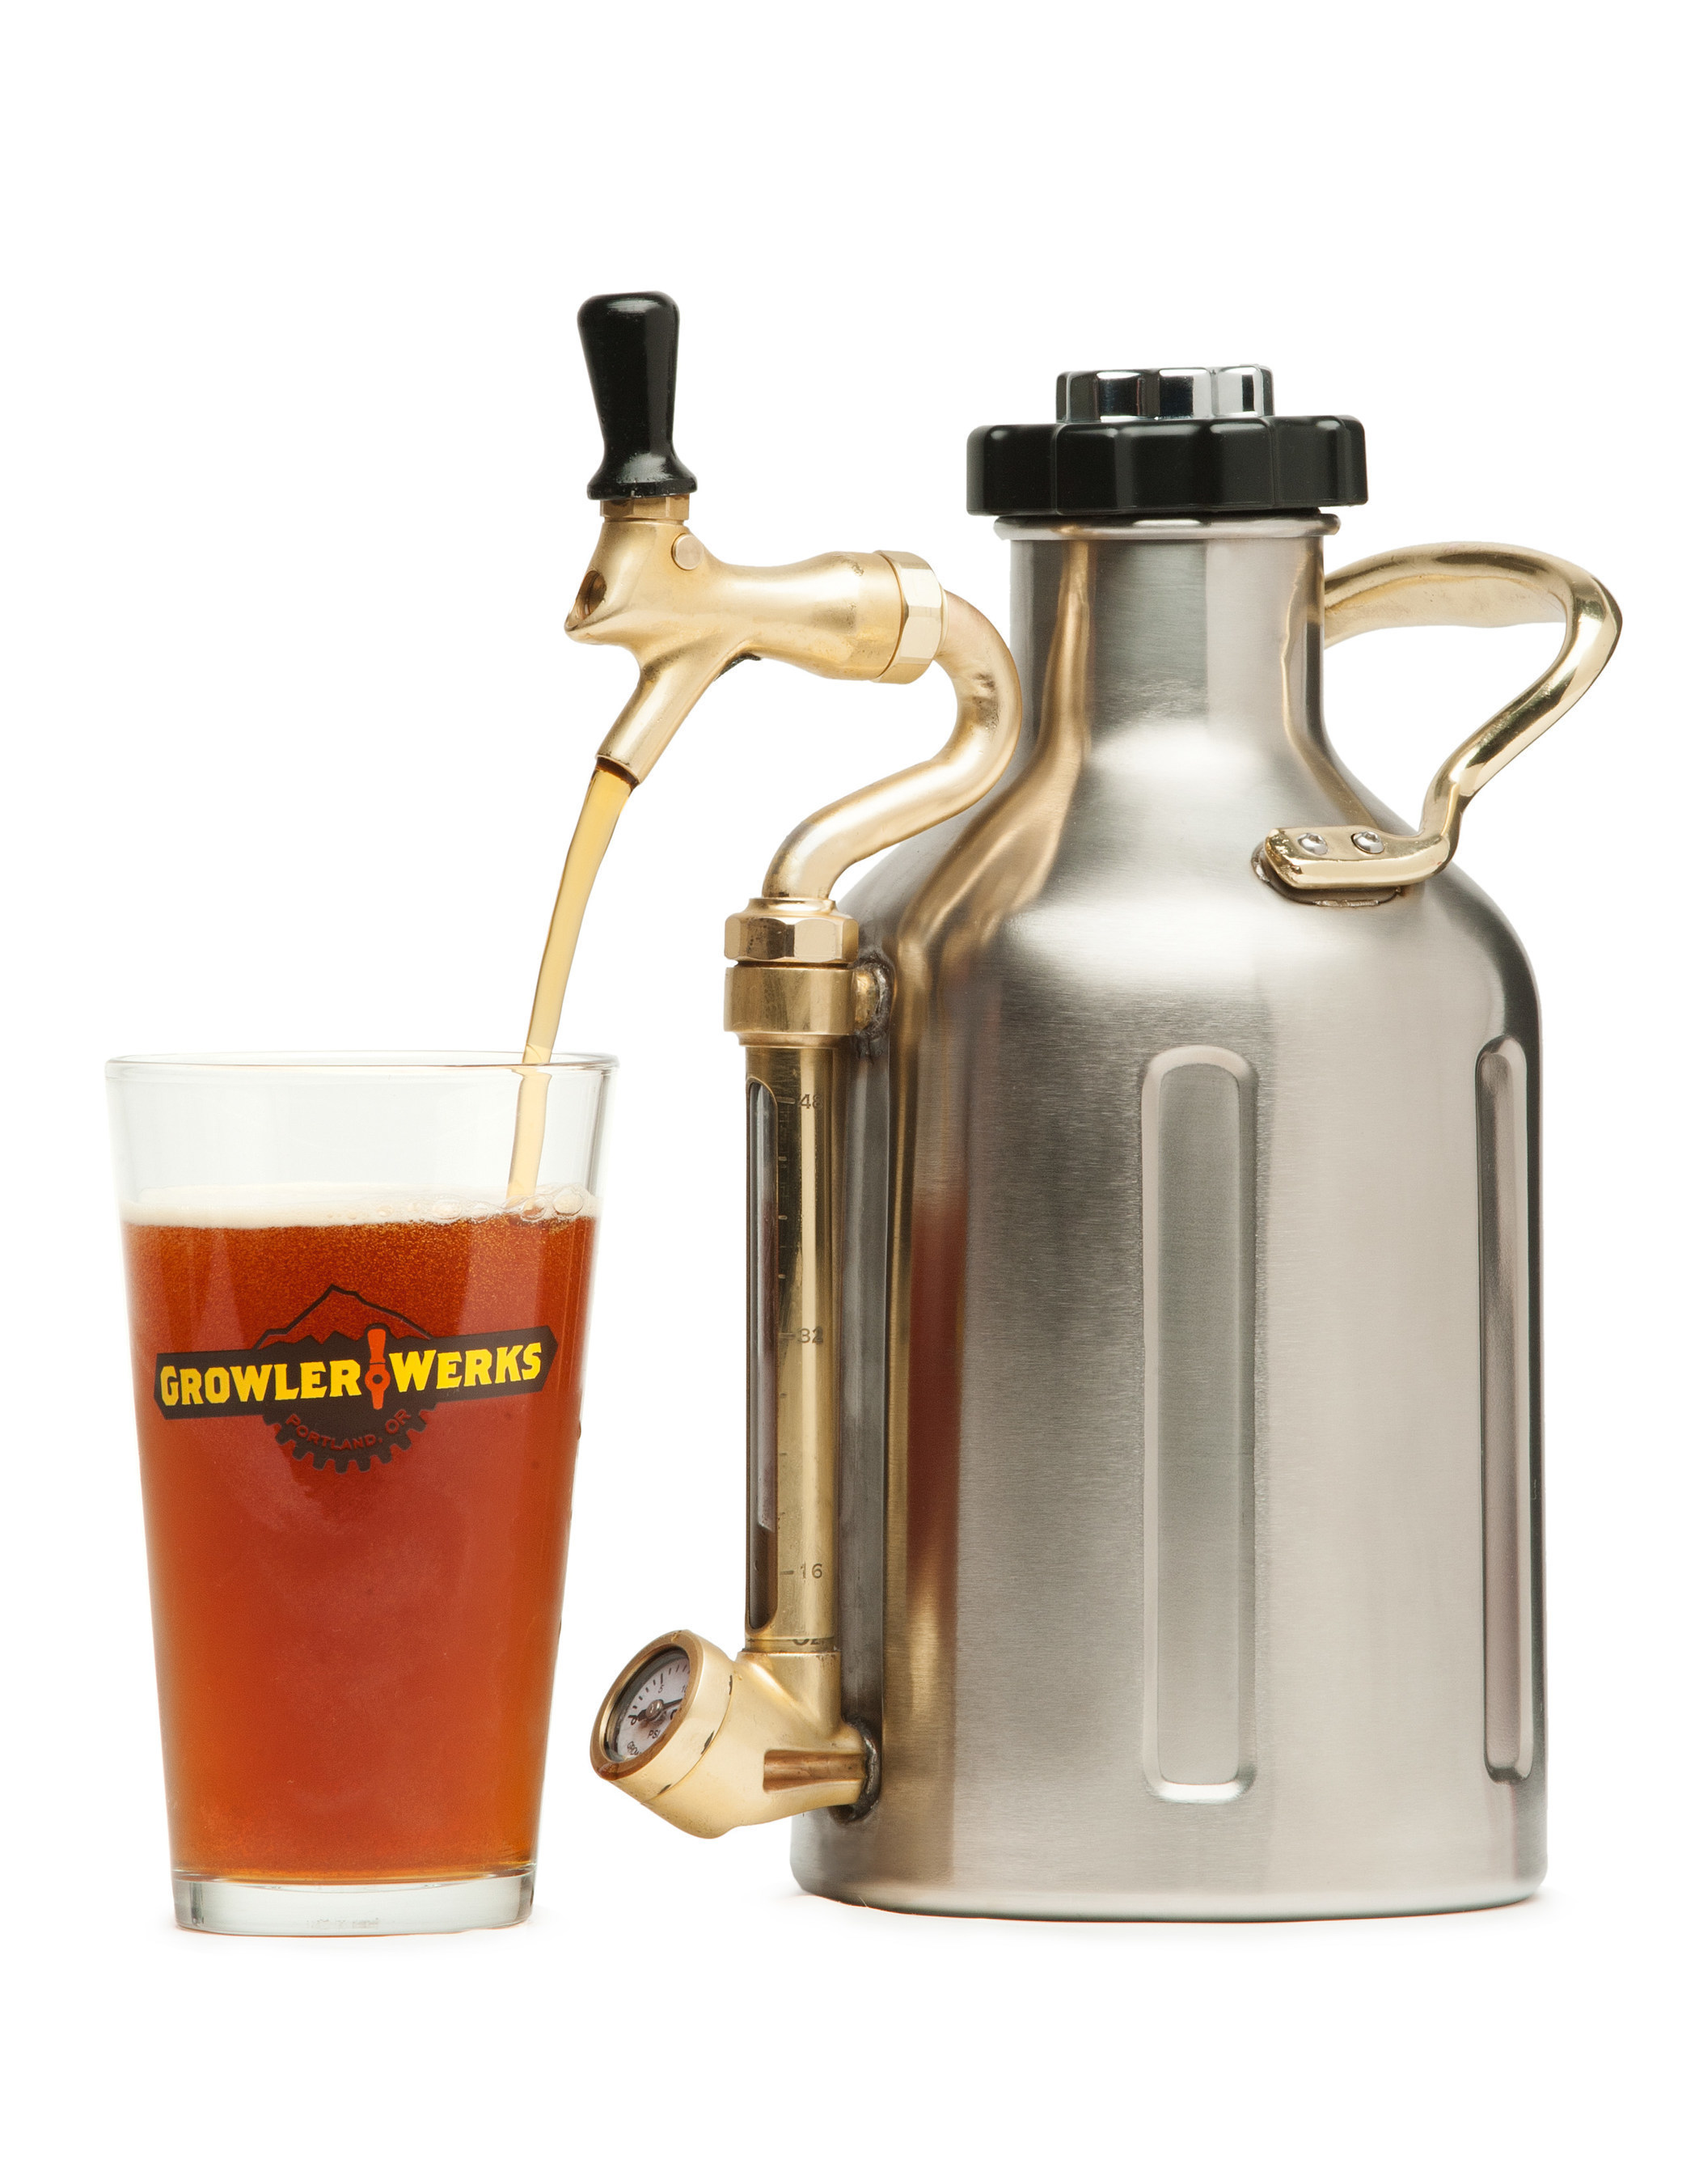 GrowlerWerks' uKeg keeps beer fresh from the first to last pour.